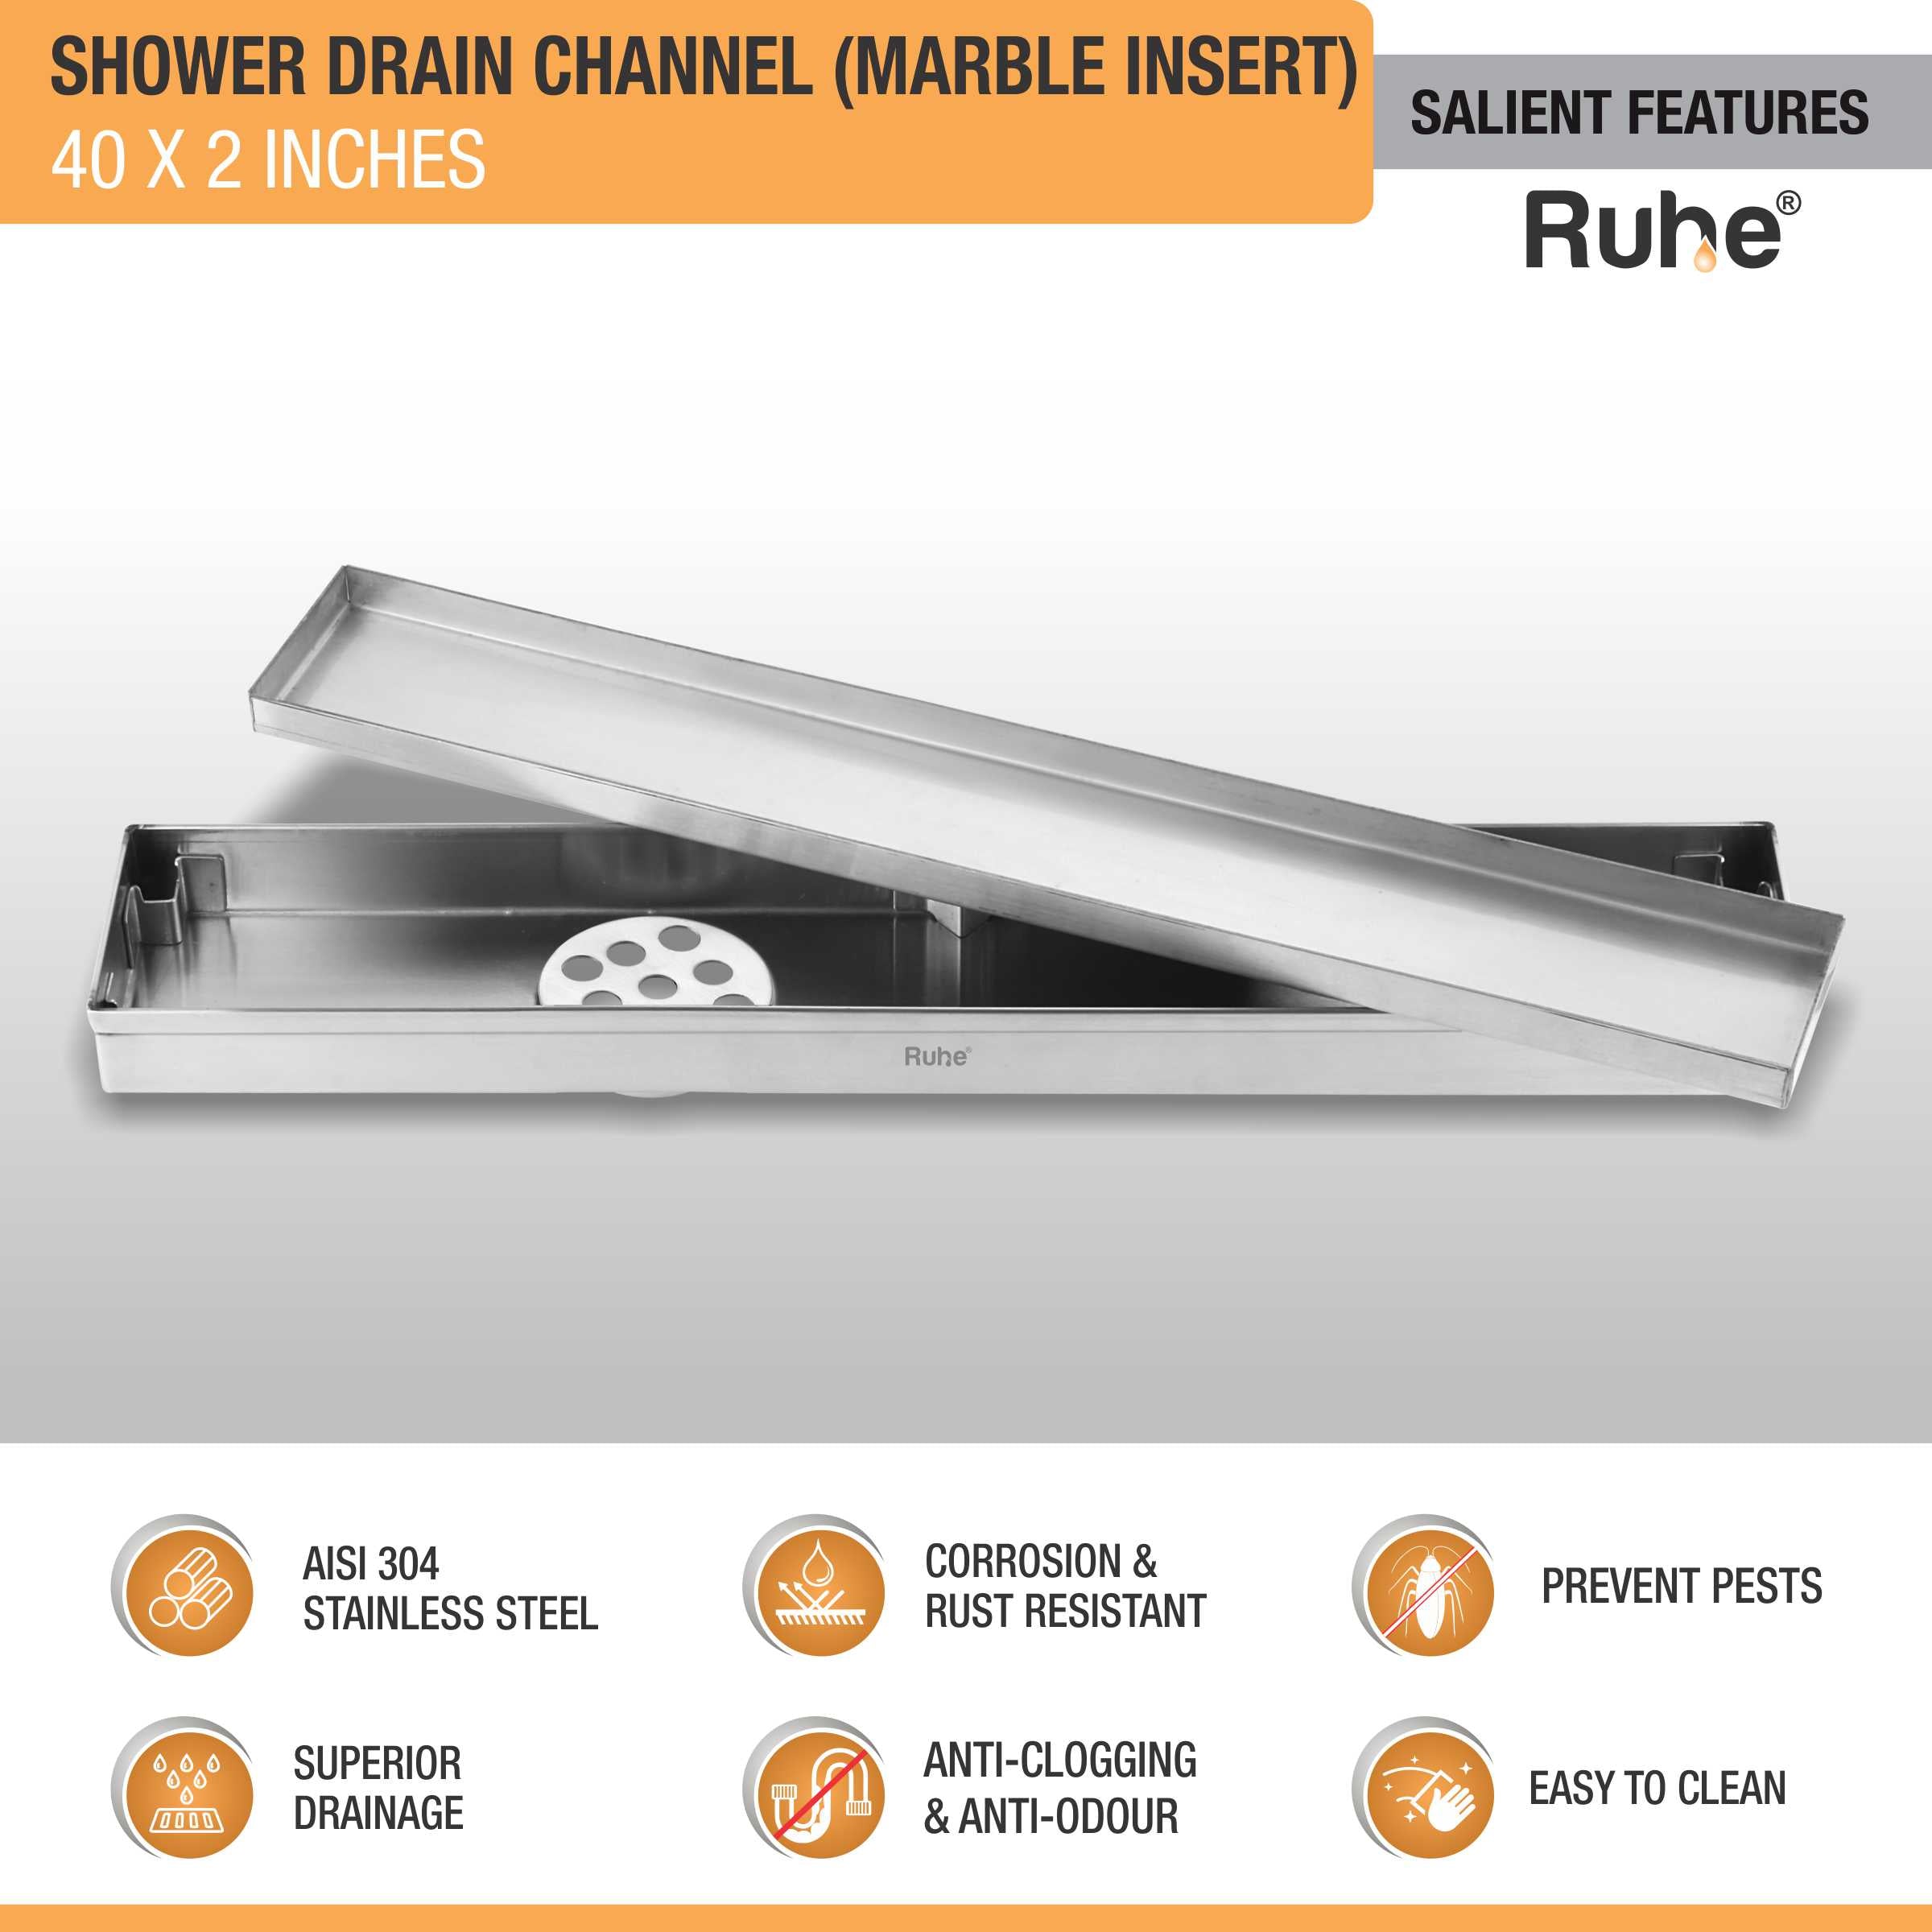 Marble Insert Shower Drain Channel (40 x 2 Inches) (304 Grade) features